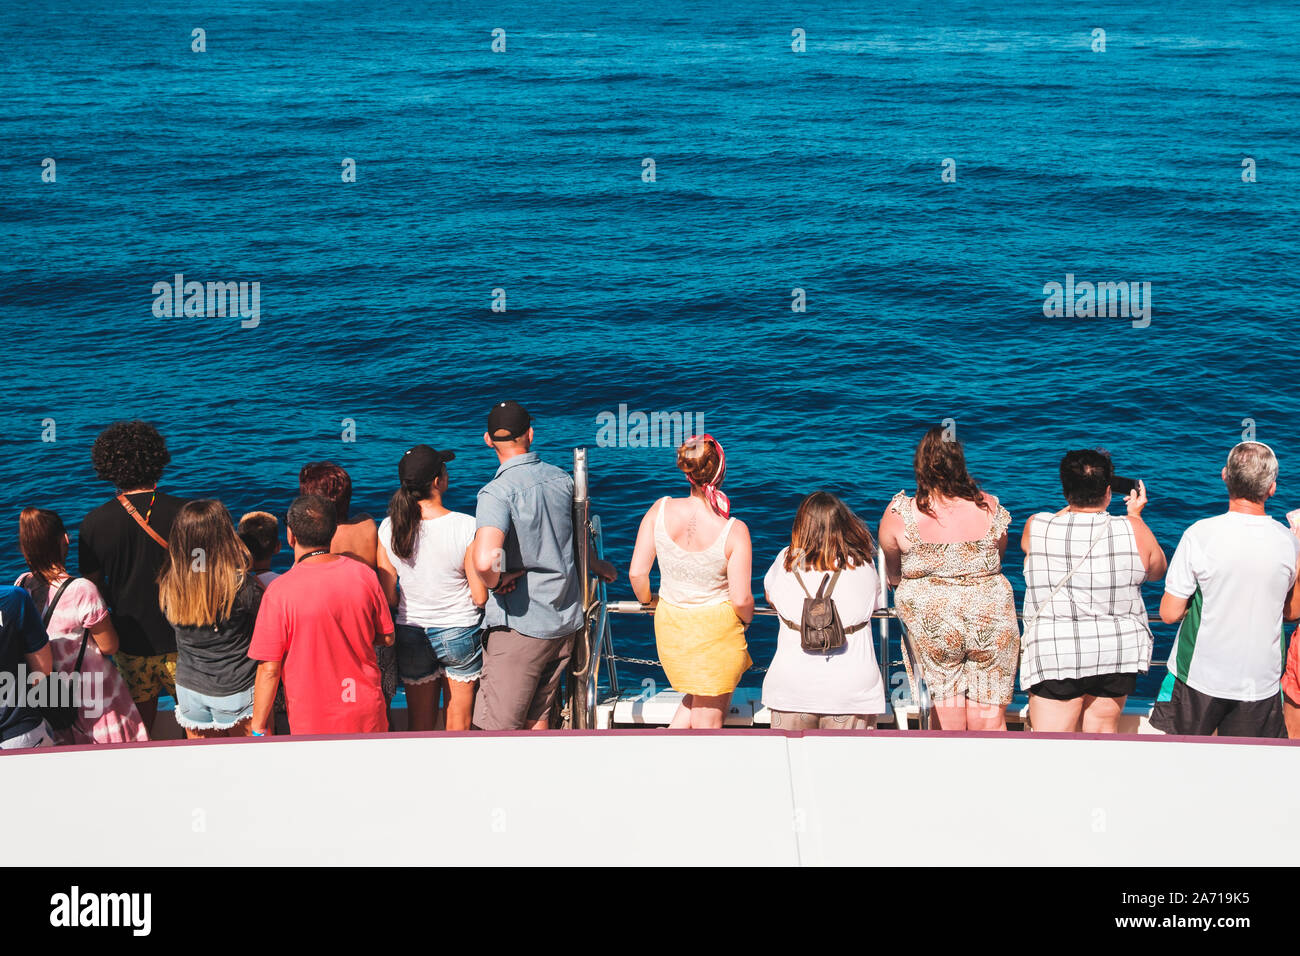 Tenerife, Spain - August, 2019: Group of people on boat from behind looking on ocean on a whale watching tour Stock Photo